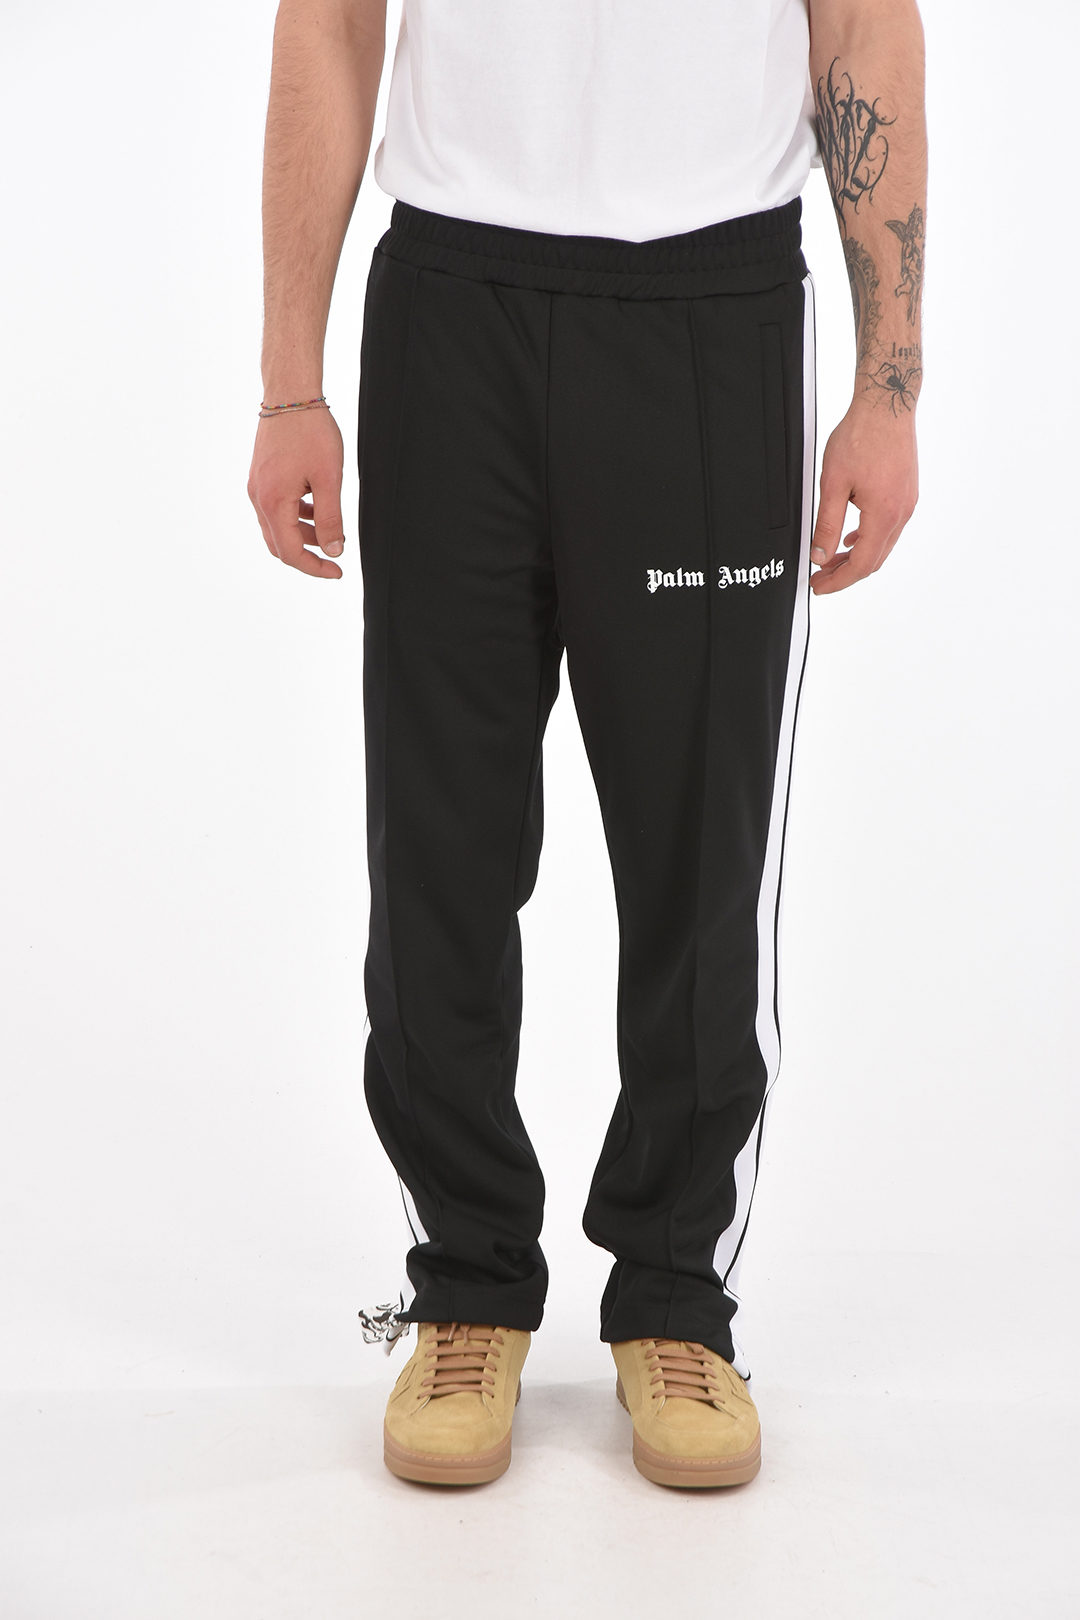 Palm Angels Contrasting Band Jersey Joggers with Ankle Zip men ...